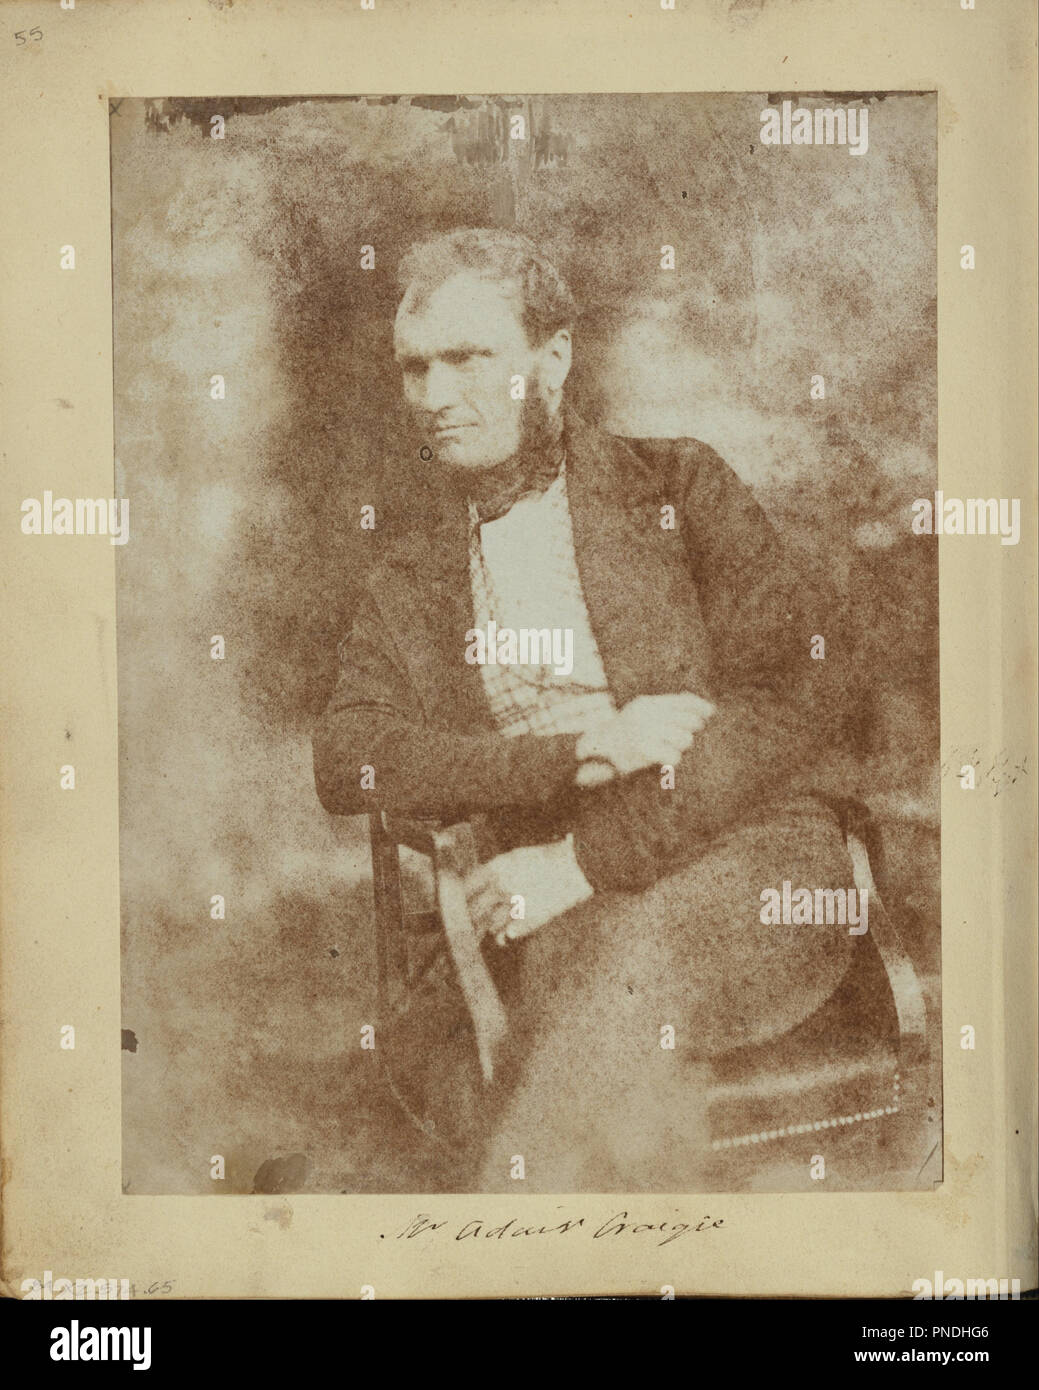 Mr. Adair Craigie. Date/Period: Ca. 1847. Print. Salt, from a calotype negative. Height: 191 mm (7.51 in); Width: 143 mm (5.62 in). Author: Unknown maker, British. Stock Photo